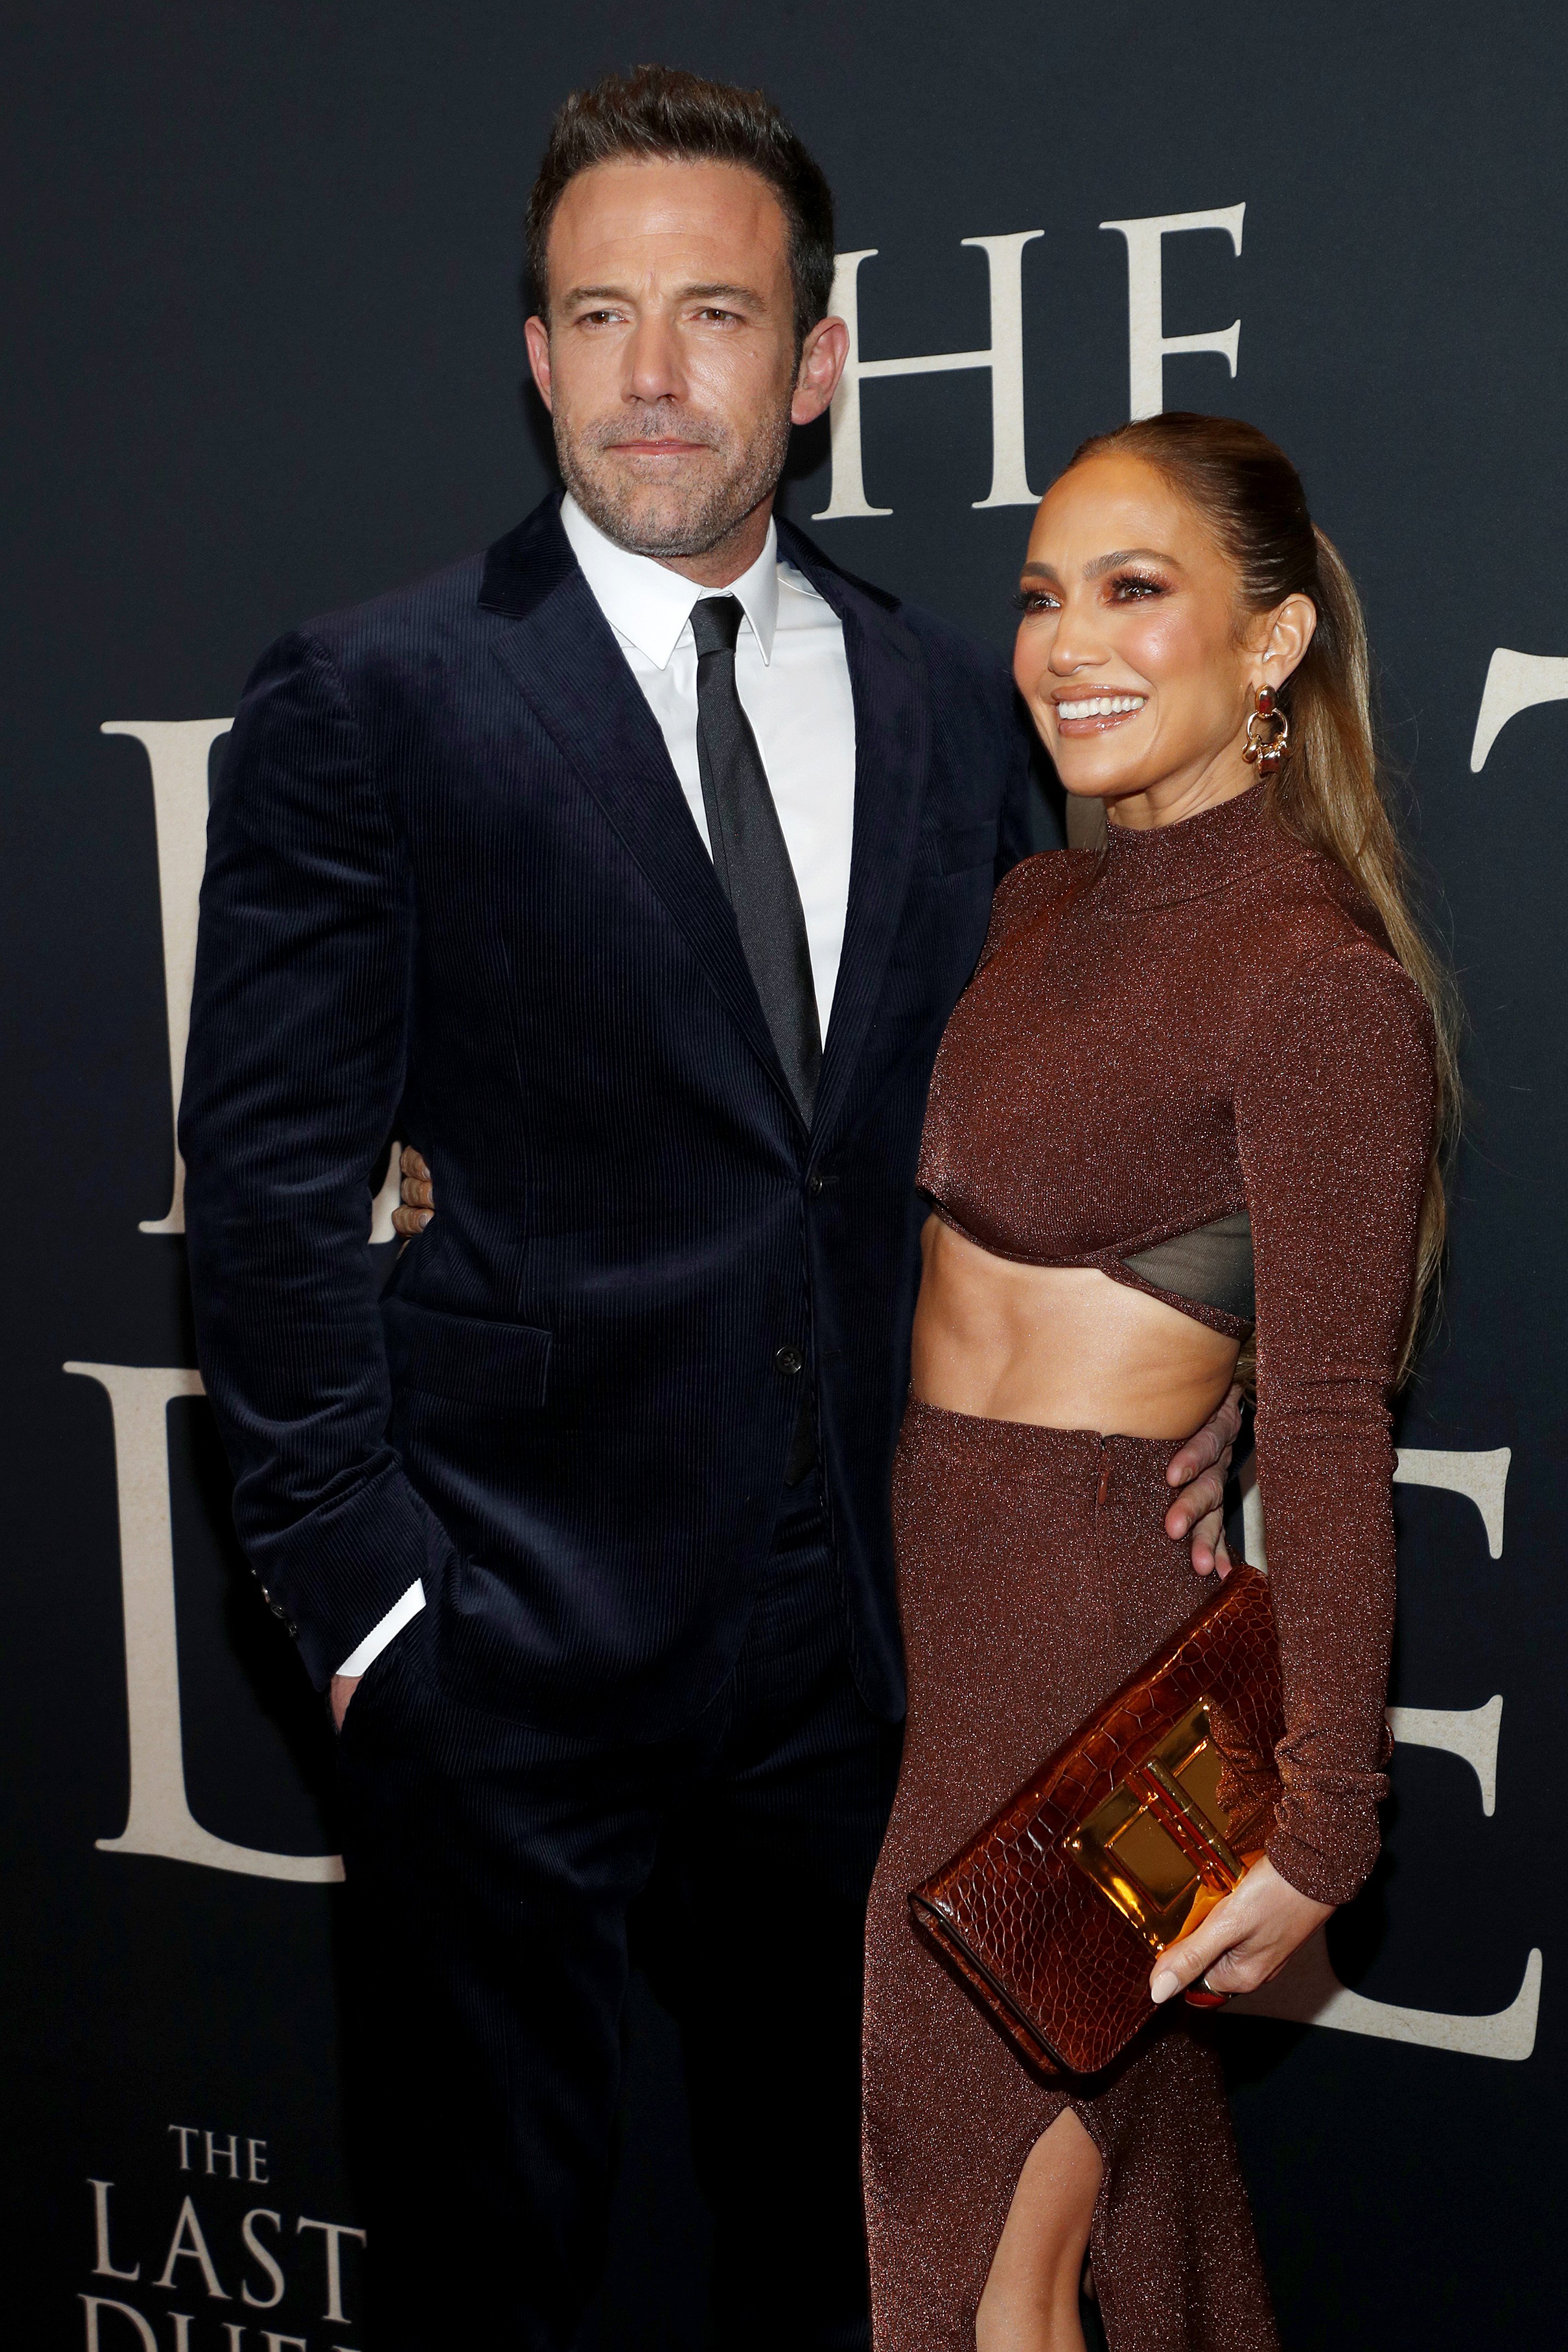 Ben Affleck and Jennifer Lopez attend The Last Duel New York Premiere on October 09, 2021 in New York City. | Source: Getty Images